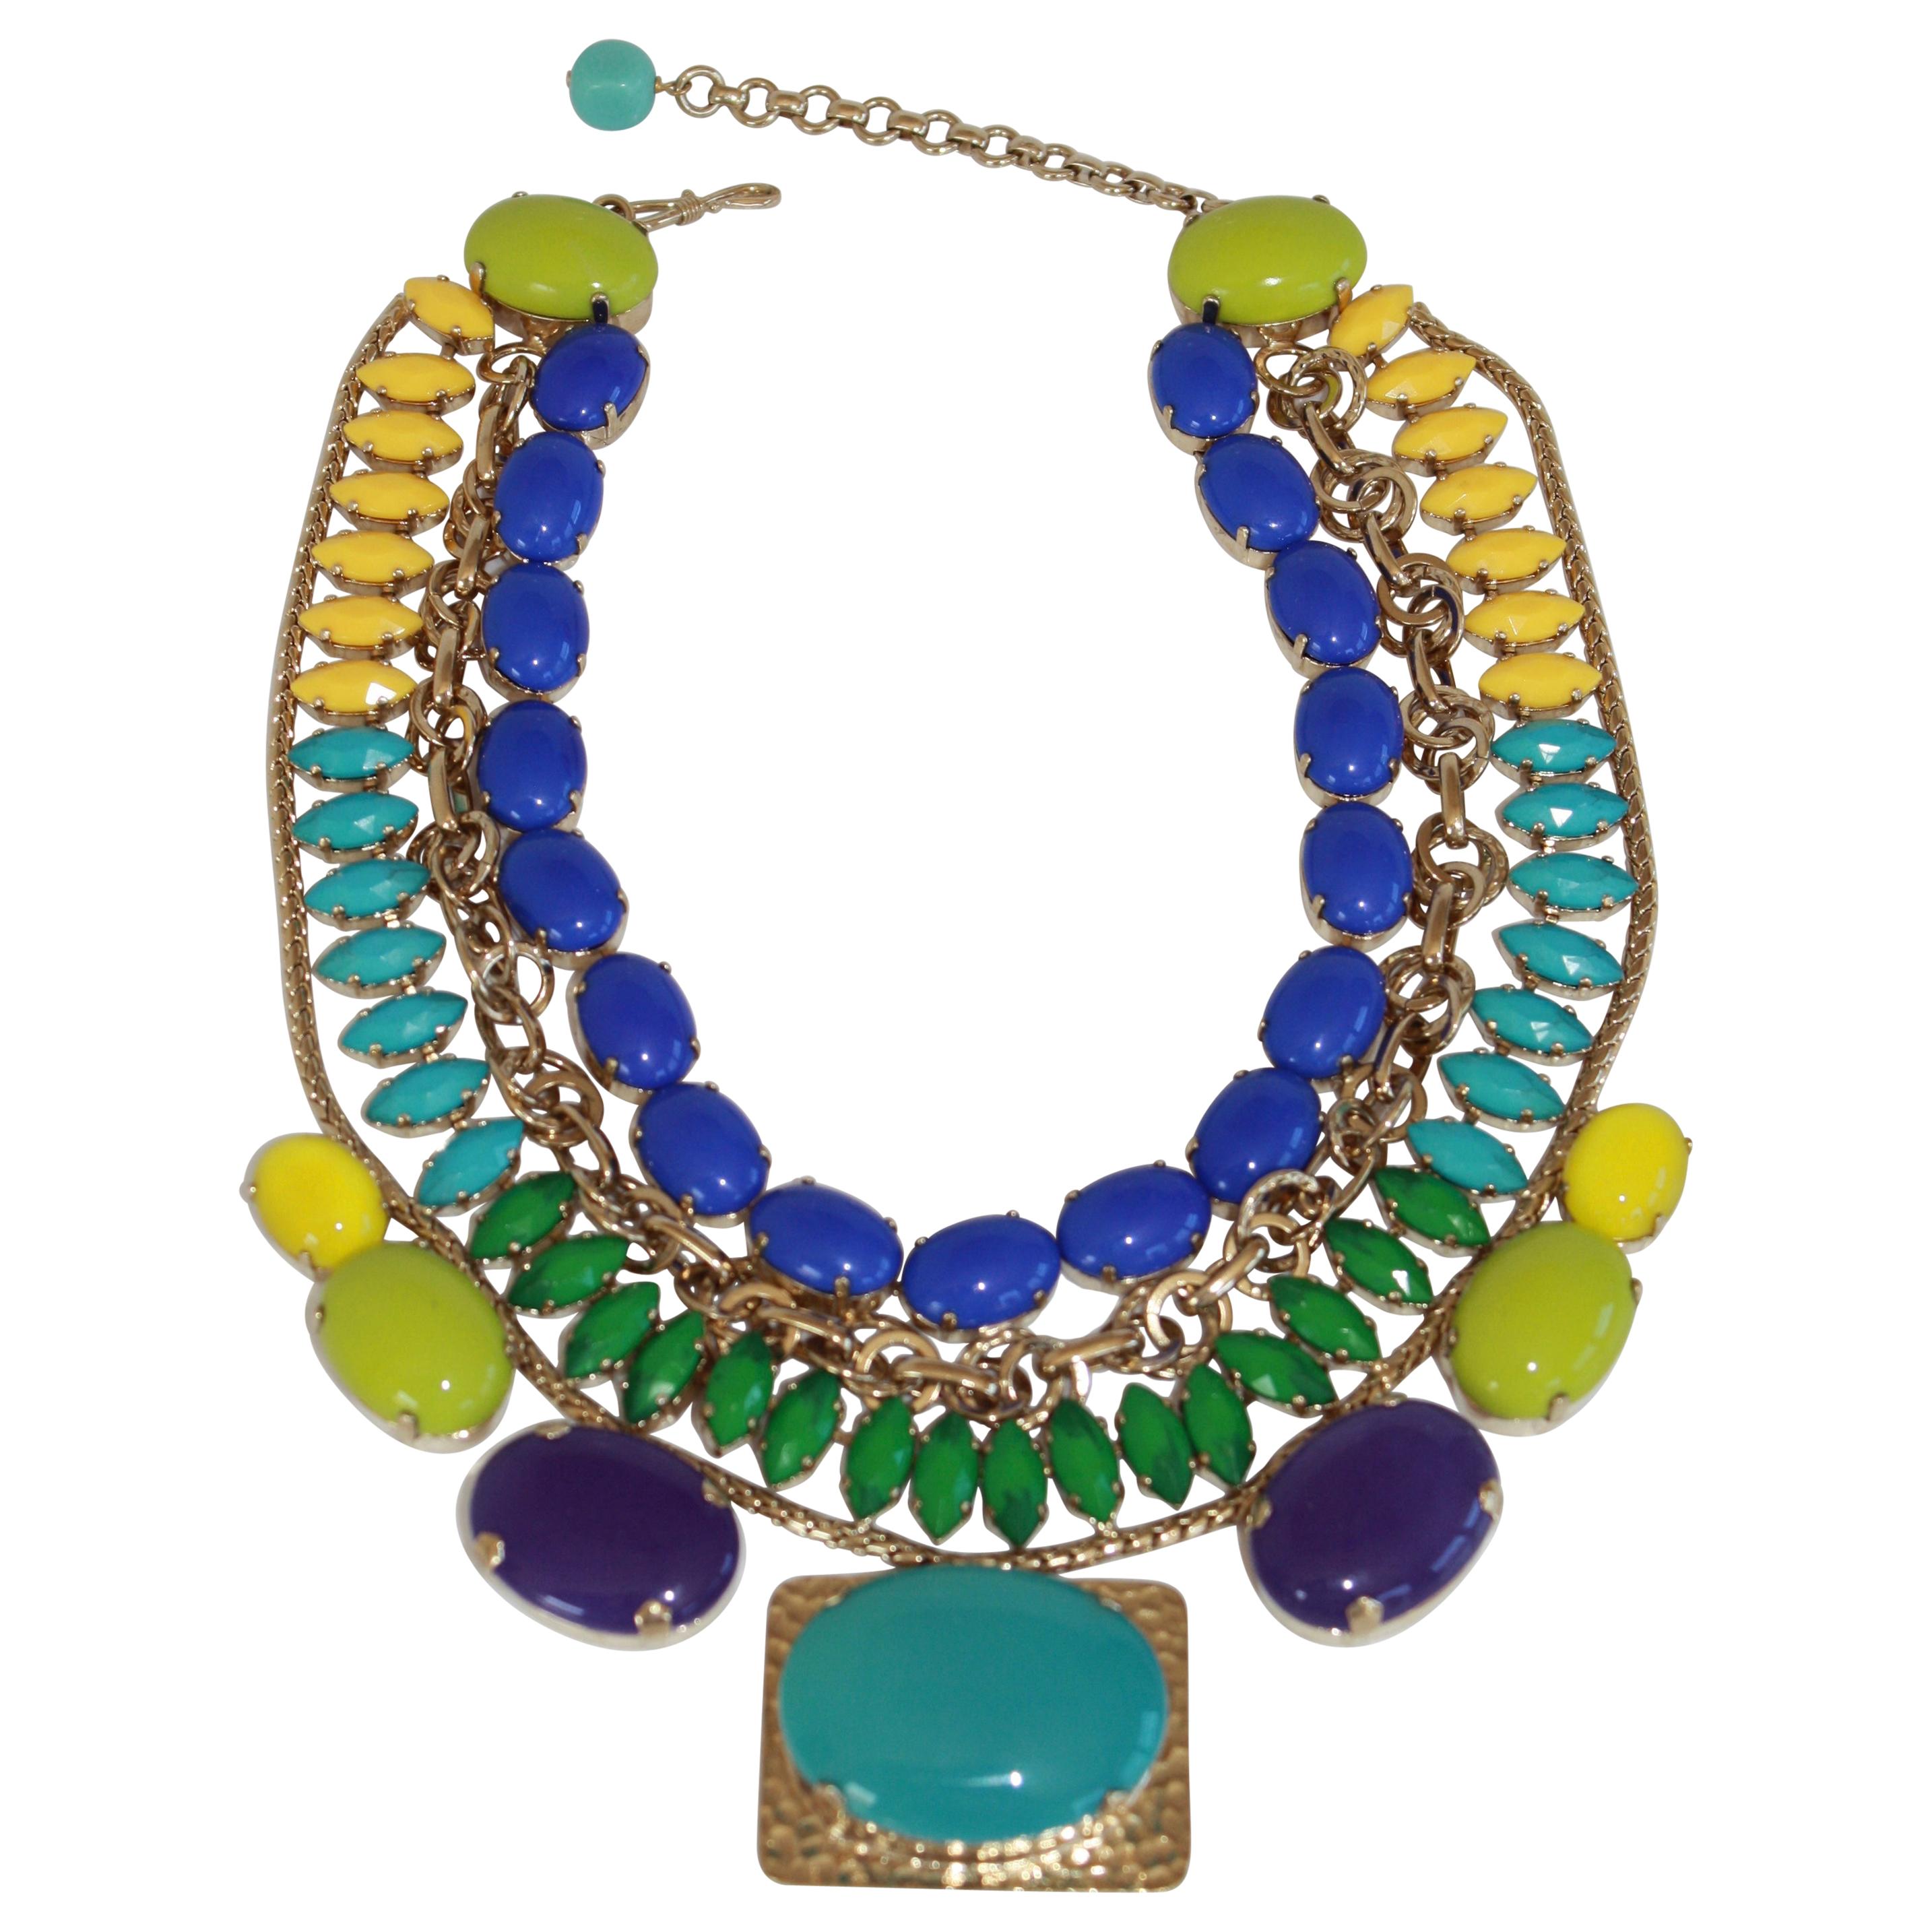 Philippe Ferrandis Handmade Glass and Pale Gold Metallic Treatment Necklace